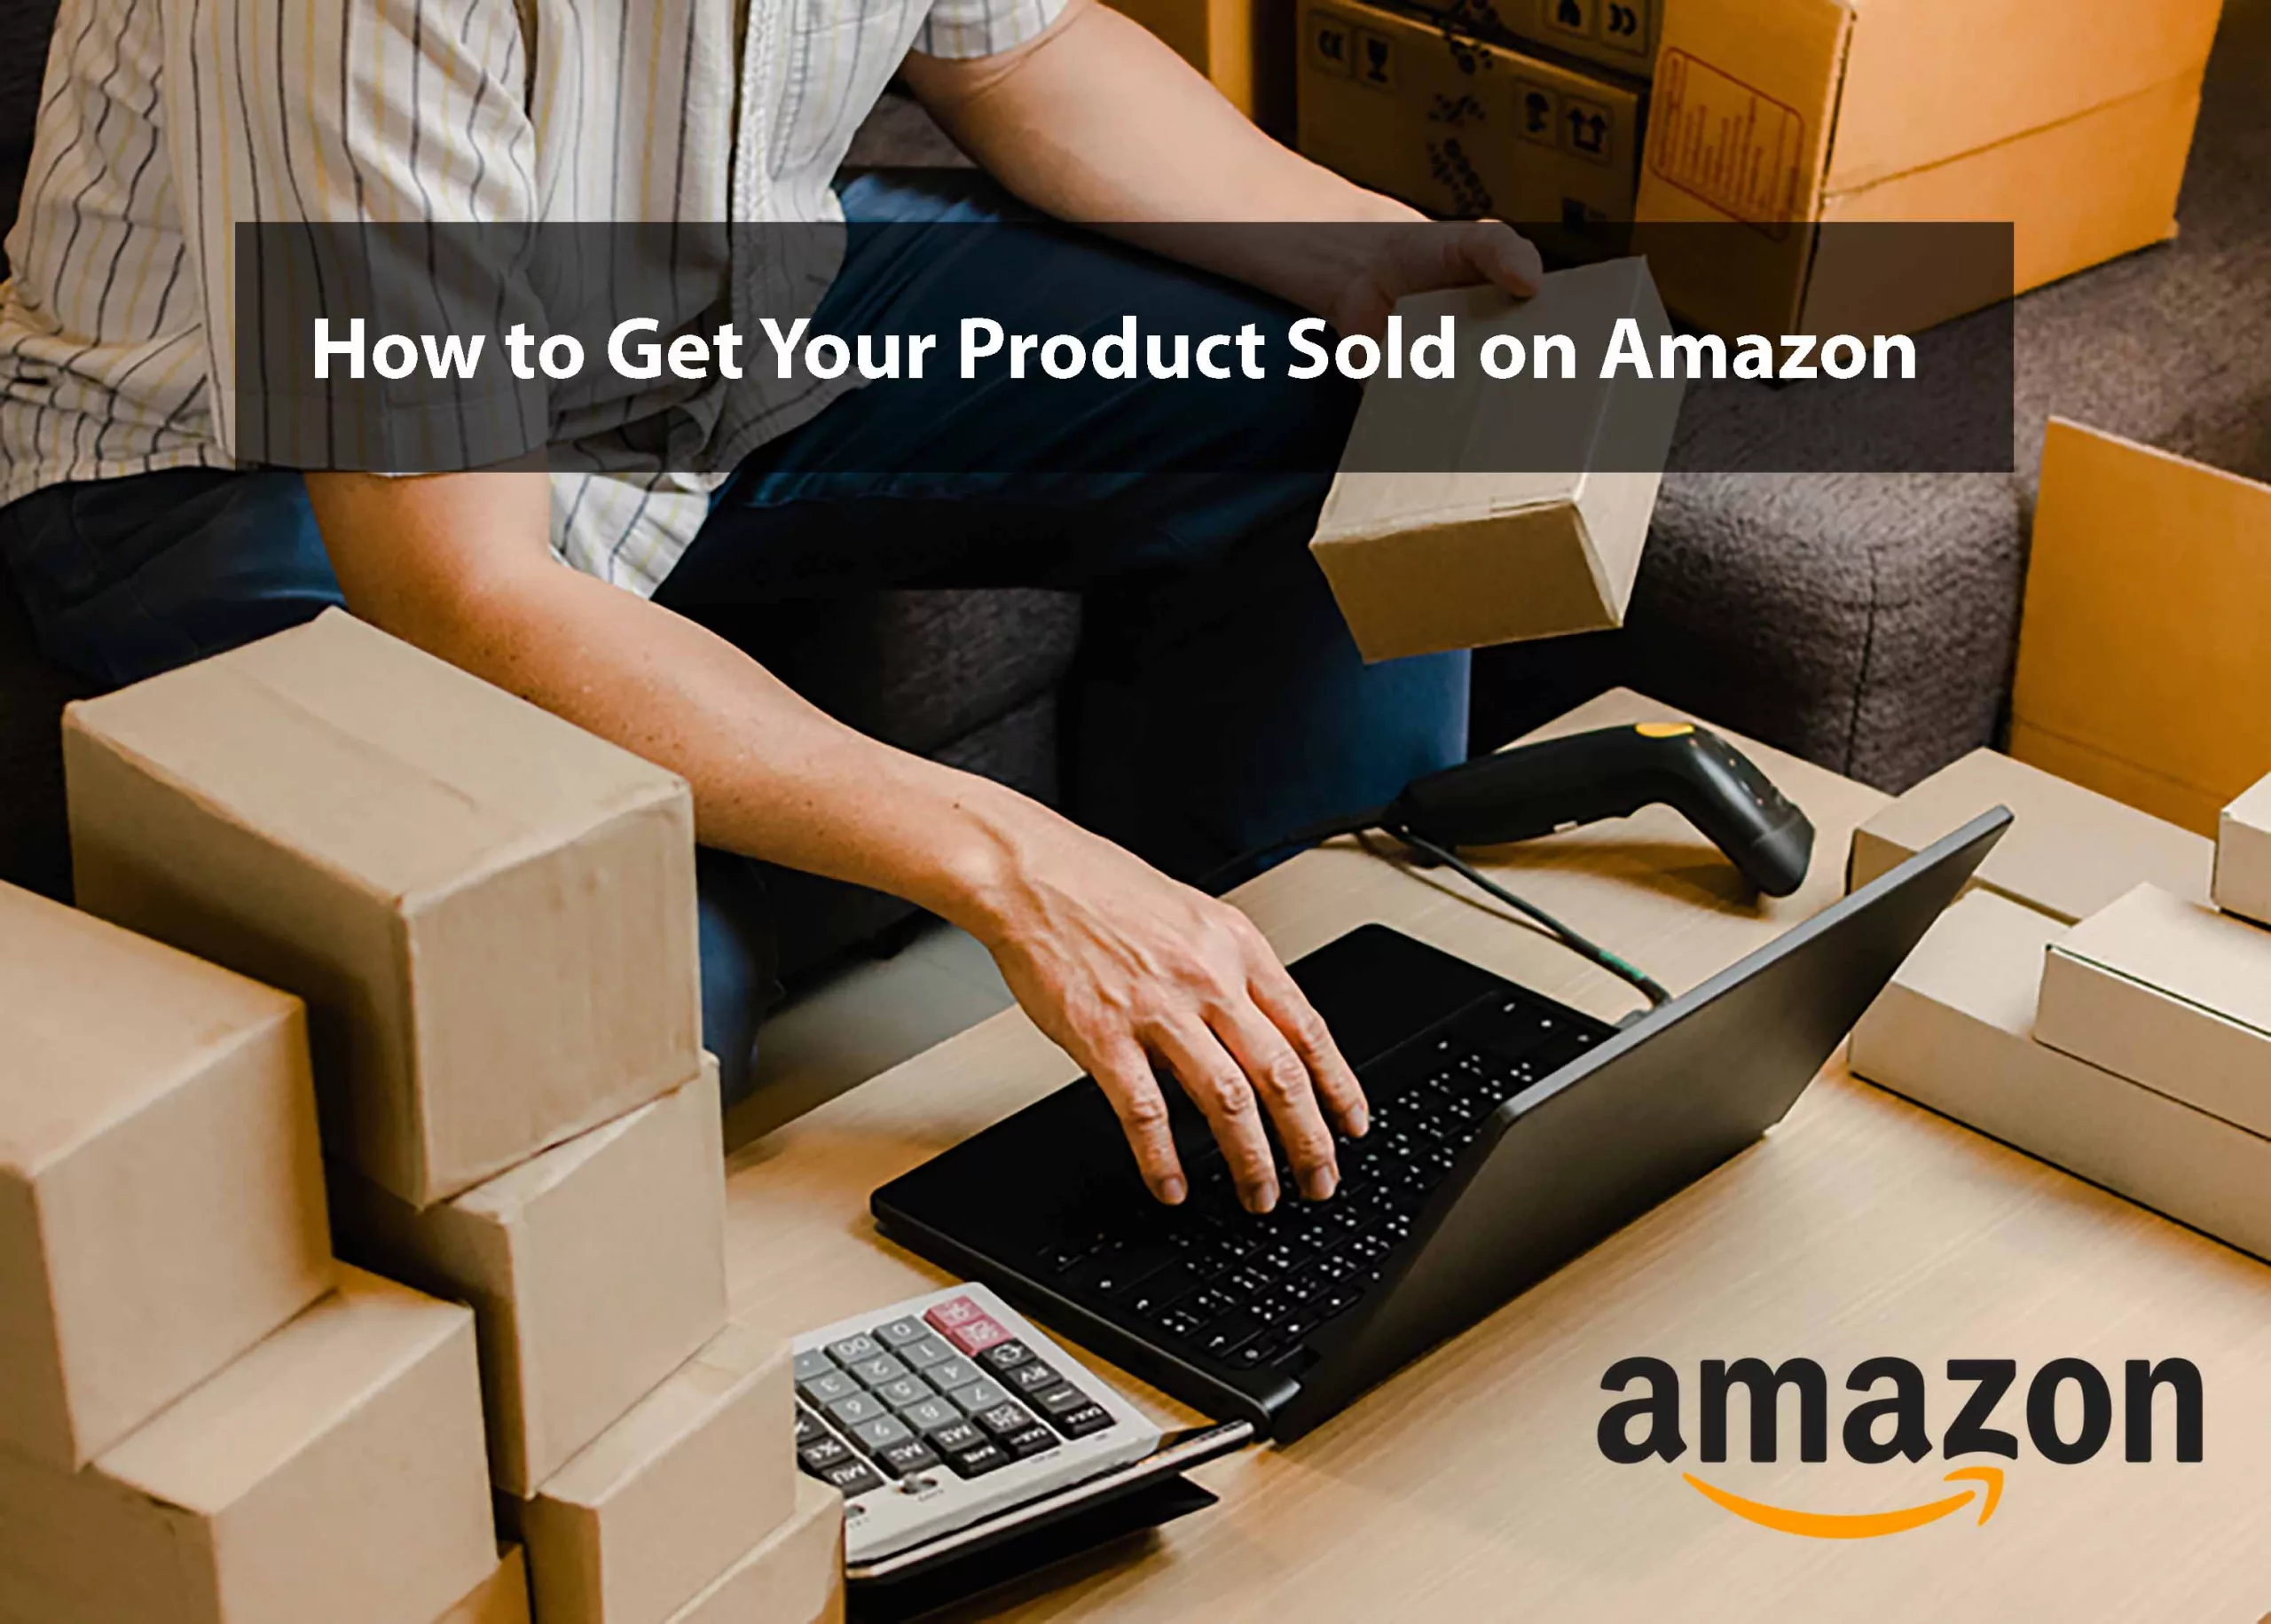 How to Get Your Product Sold on Amazon